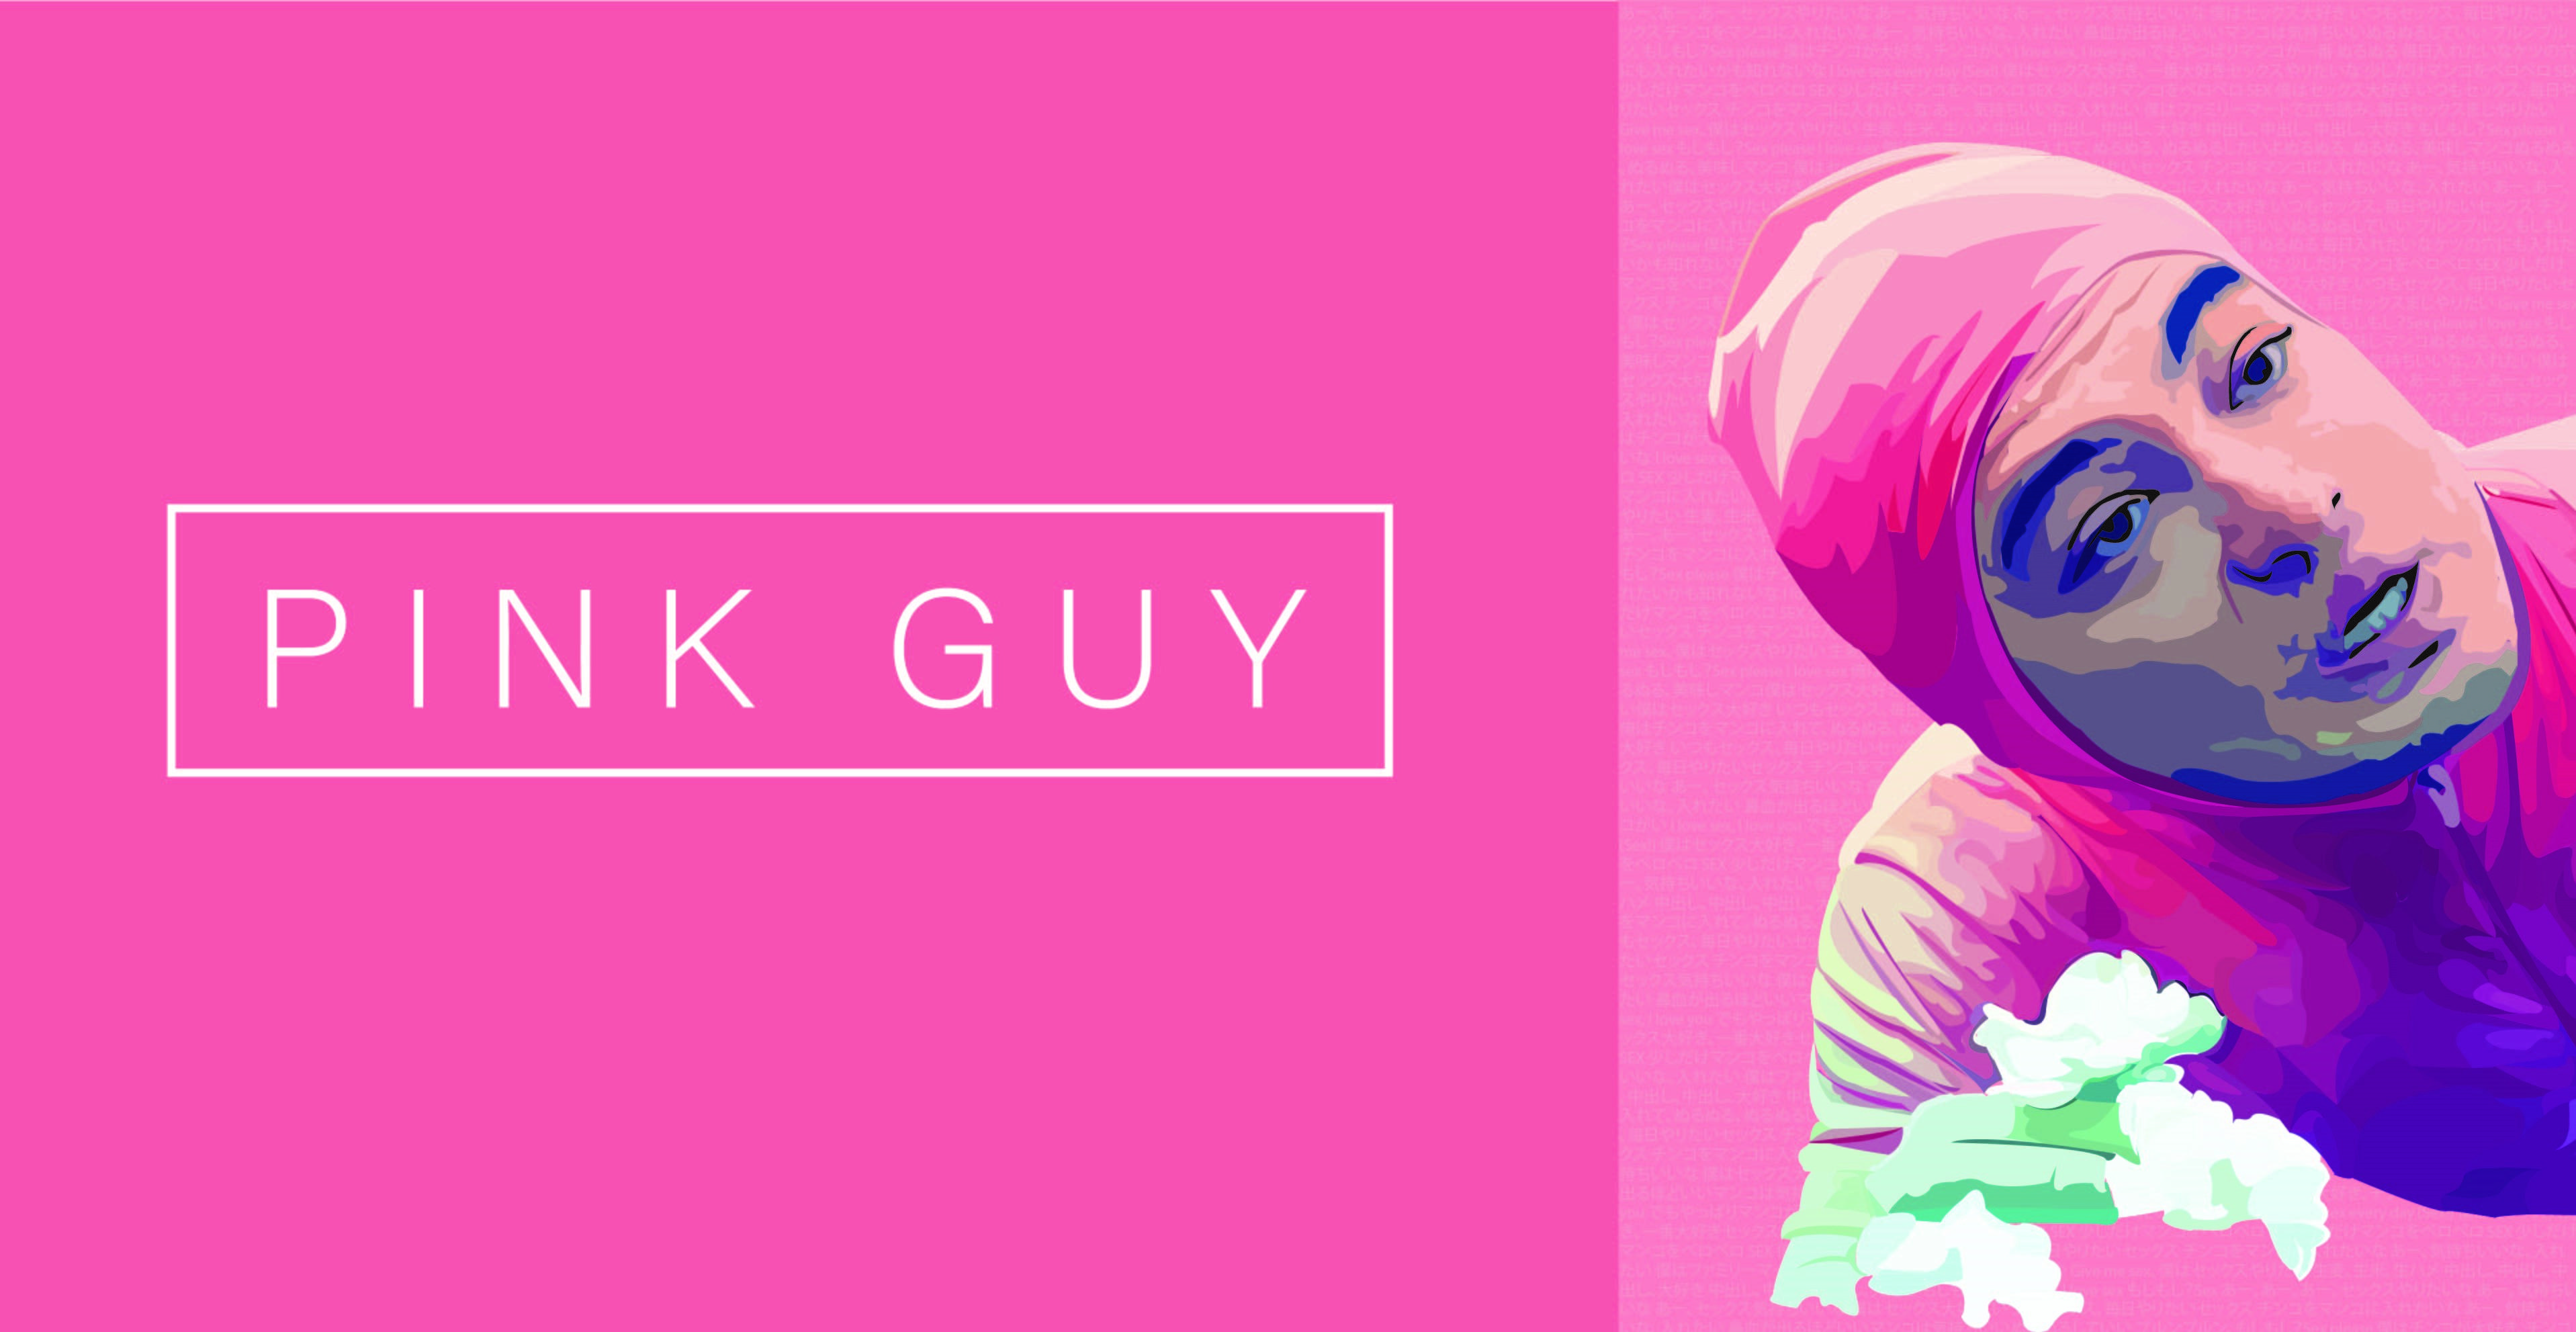 My friend made this vector art wallpaper of Pink Guy